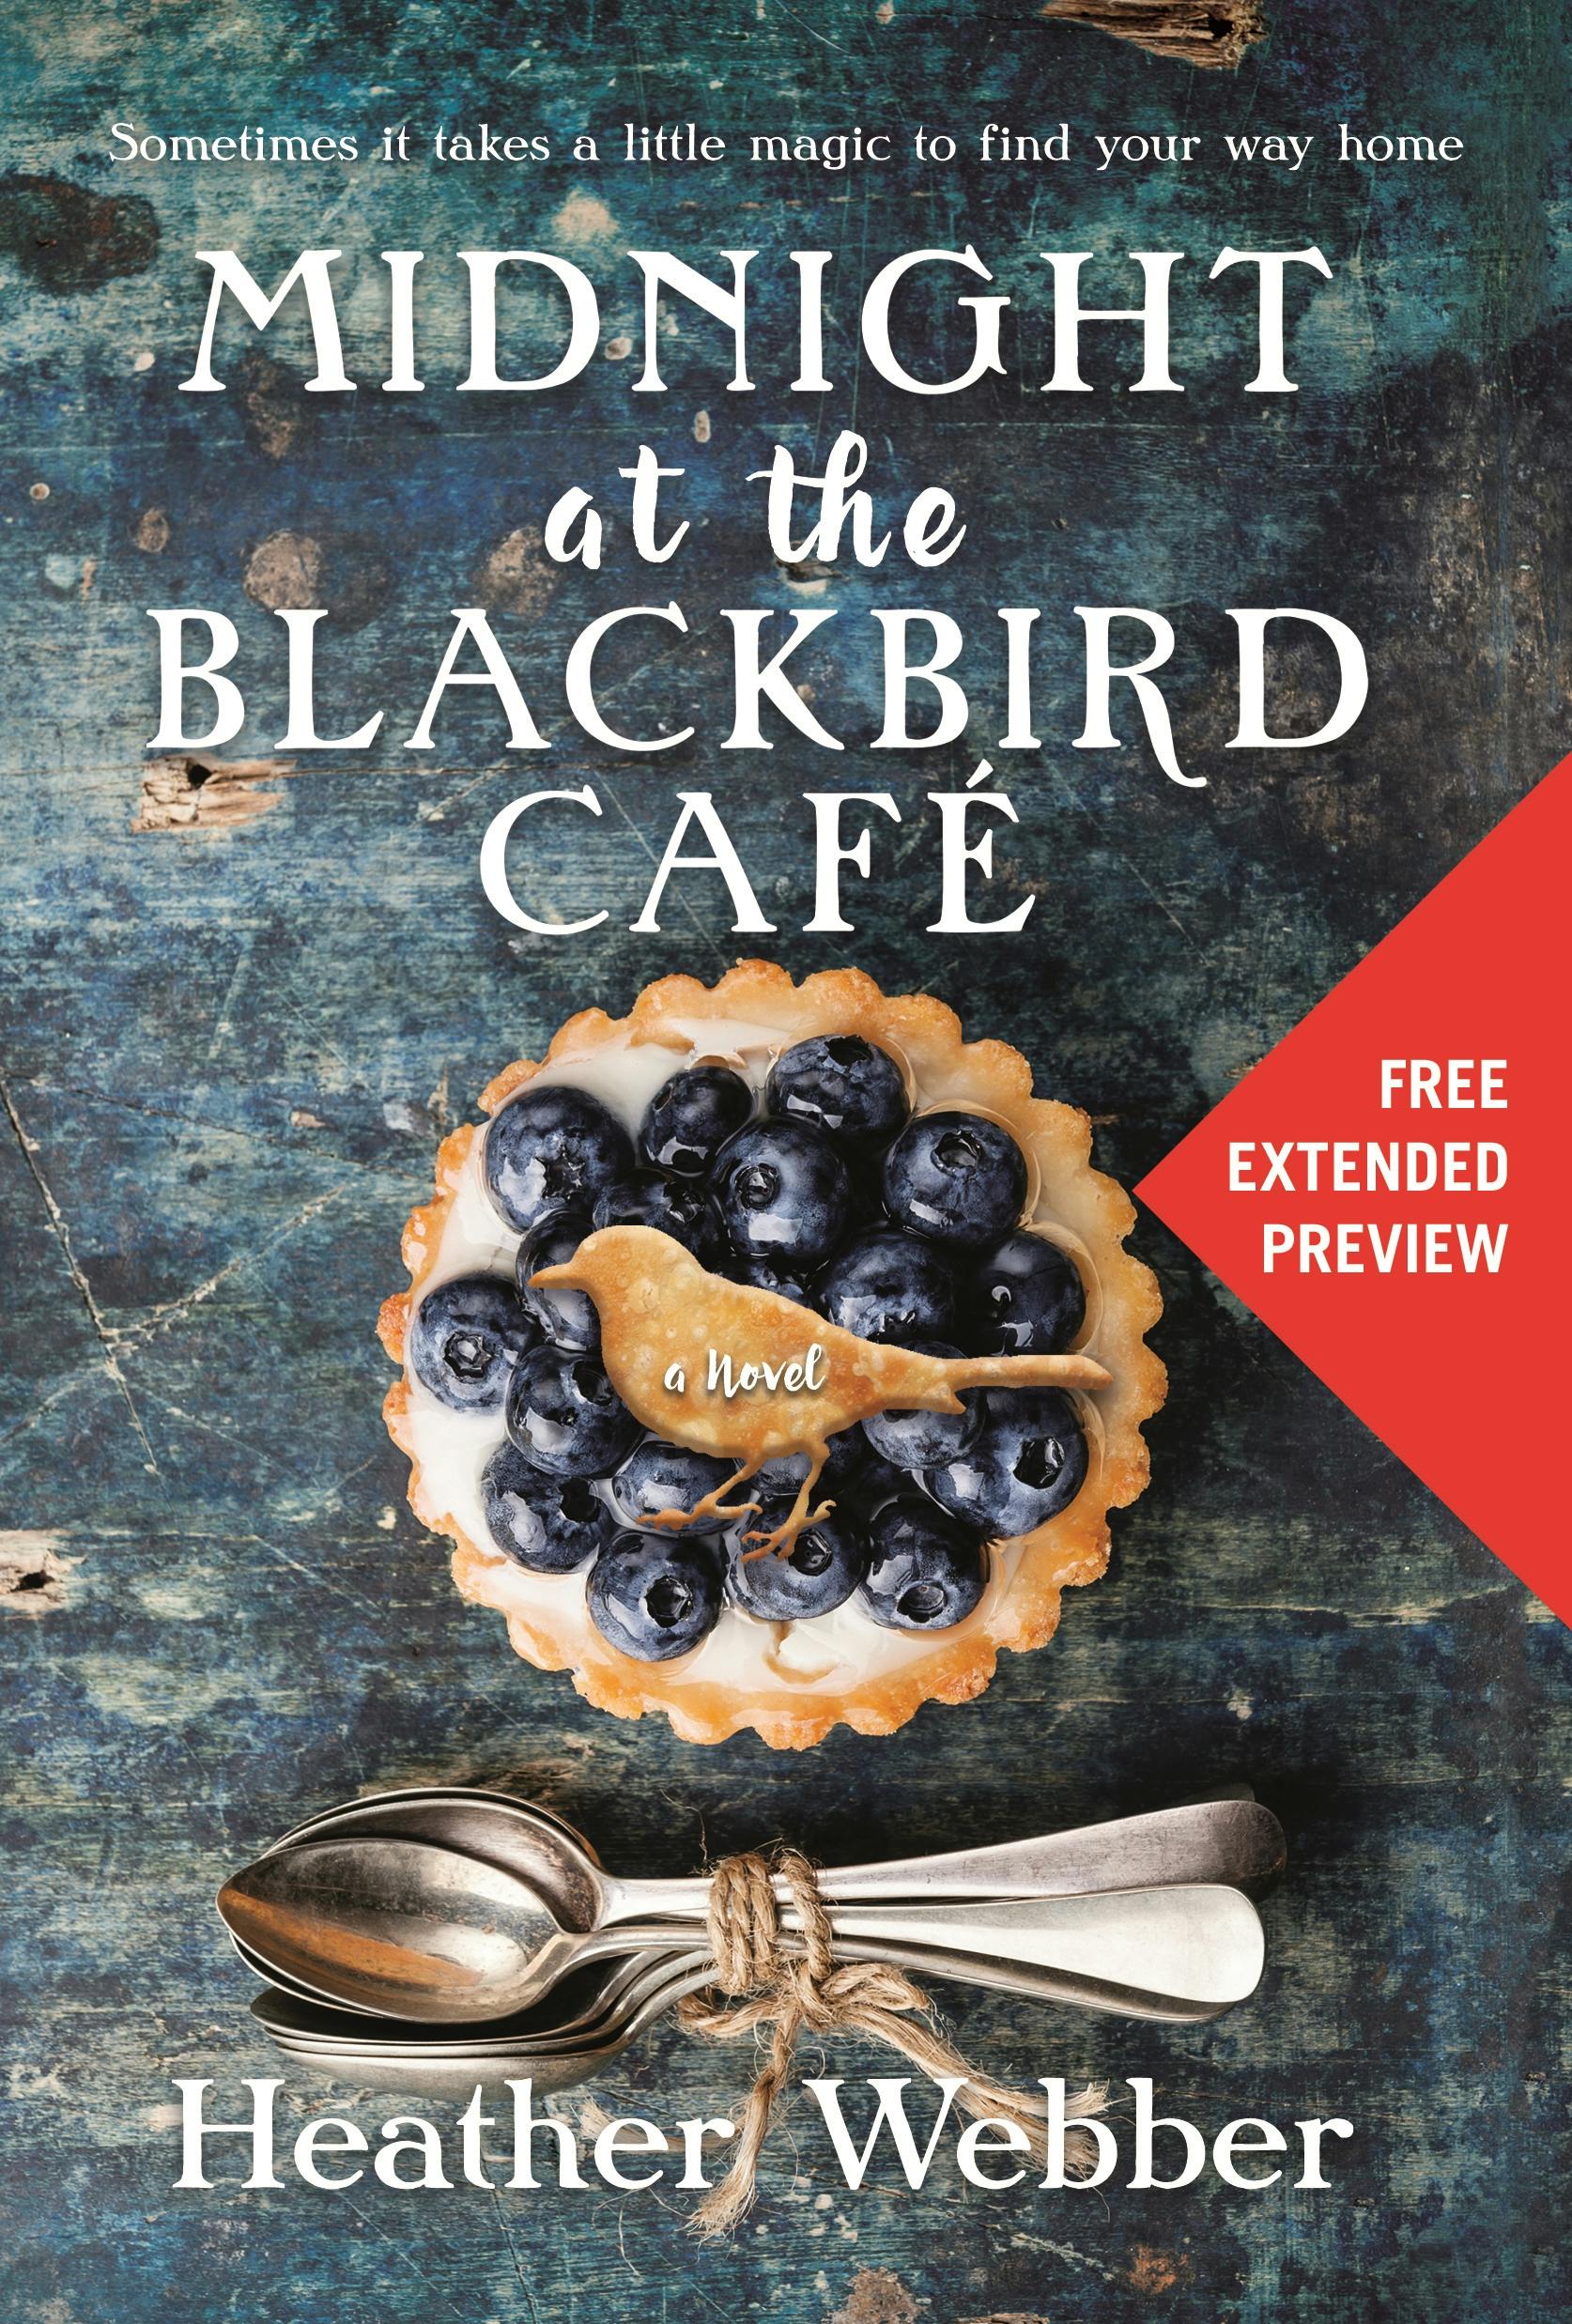 Cover for the book titled as: Midnight at the Blackbird Cafe Sneak Peek